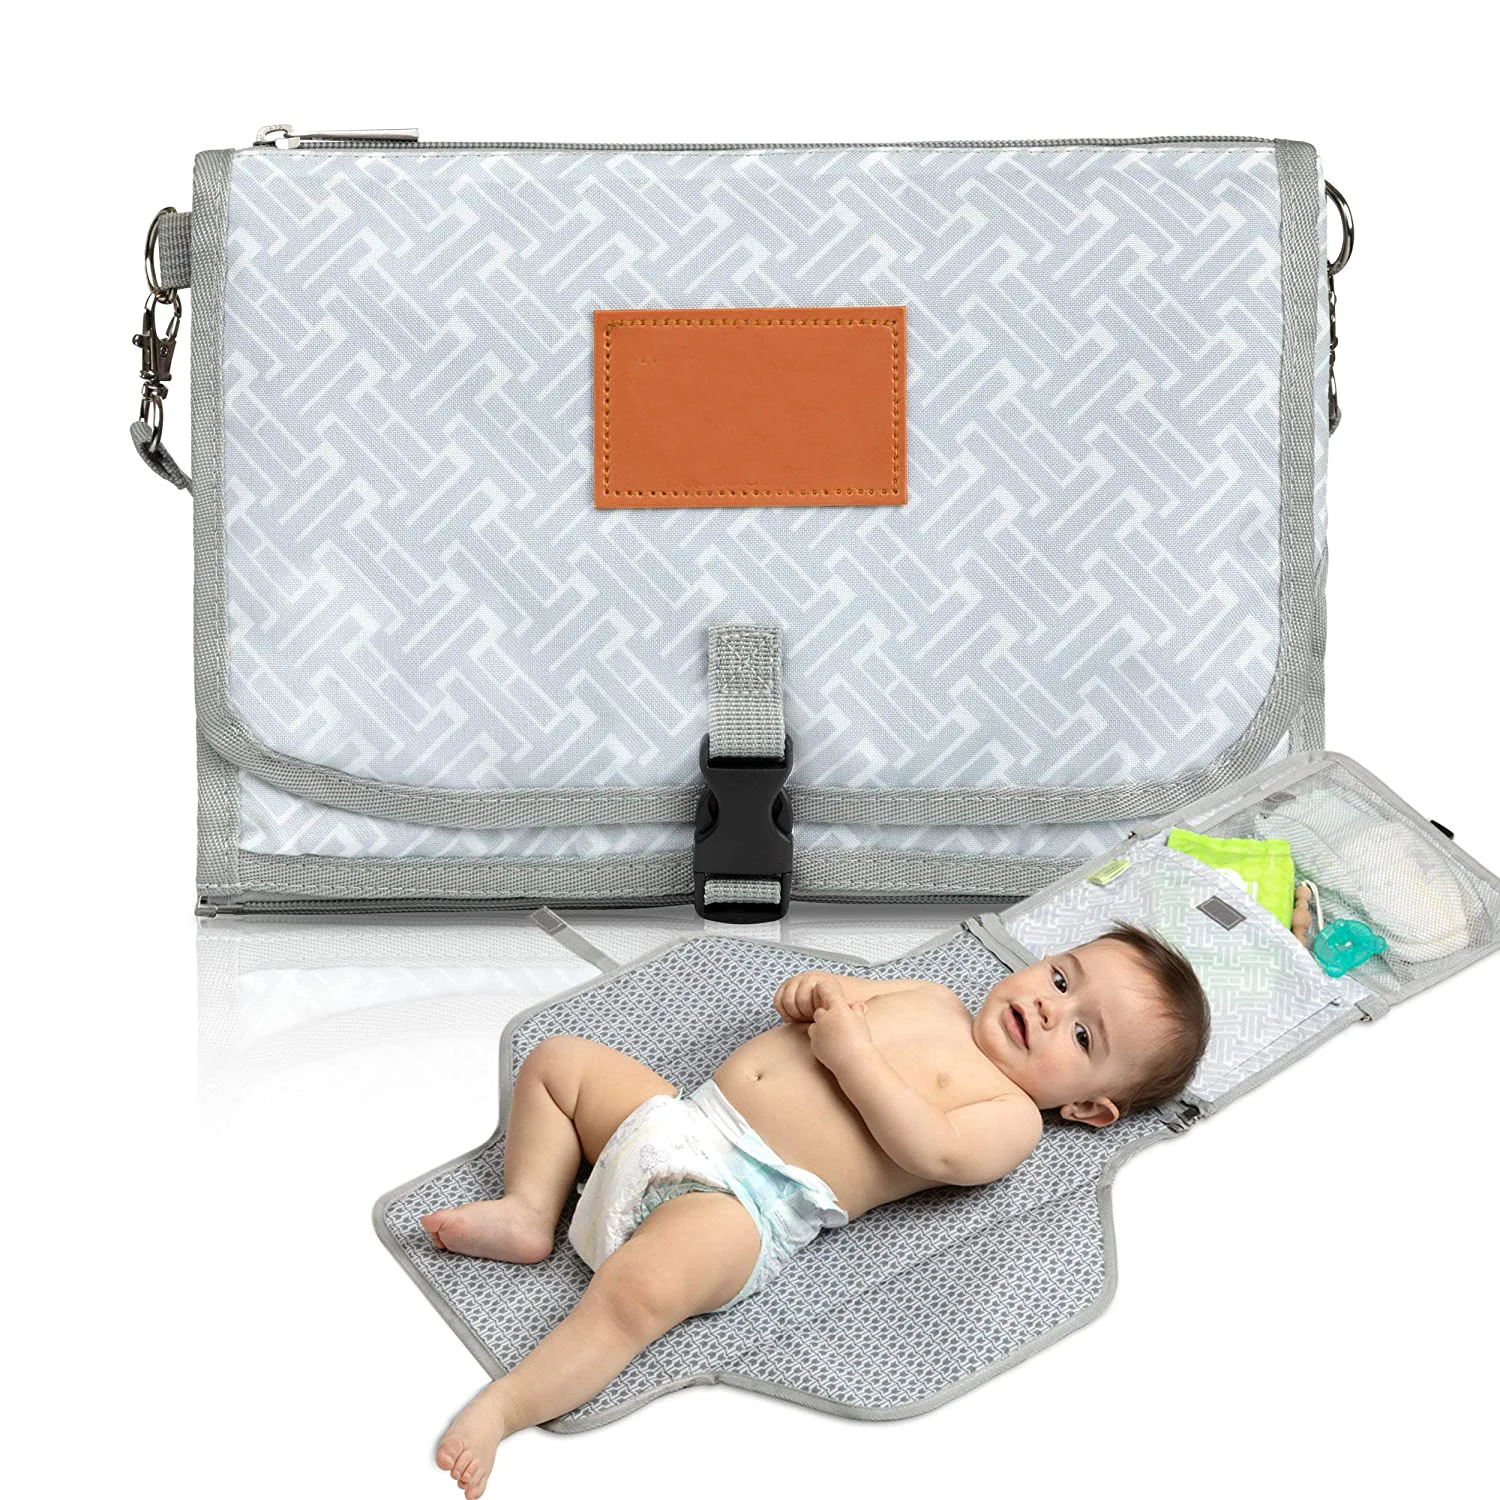 

Baby Waterproof Pad Bag Travel Portable Baby Diaper Changing Pad, As pic or as customized